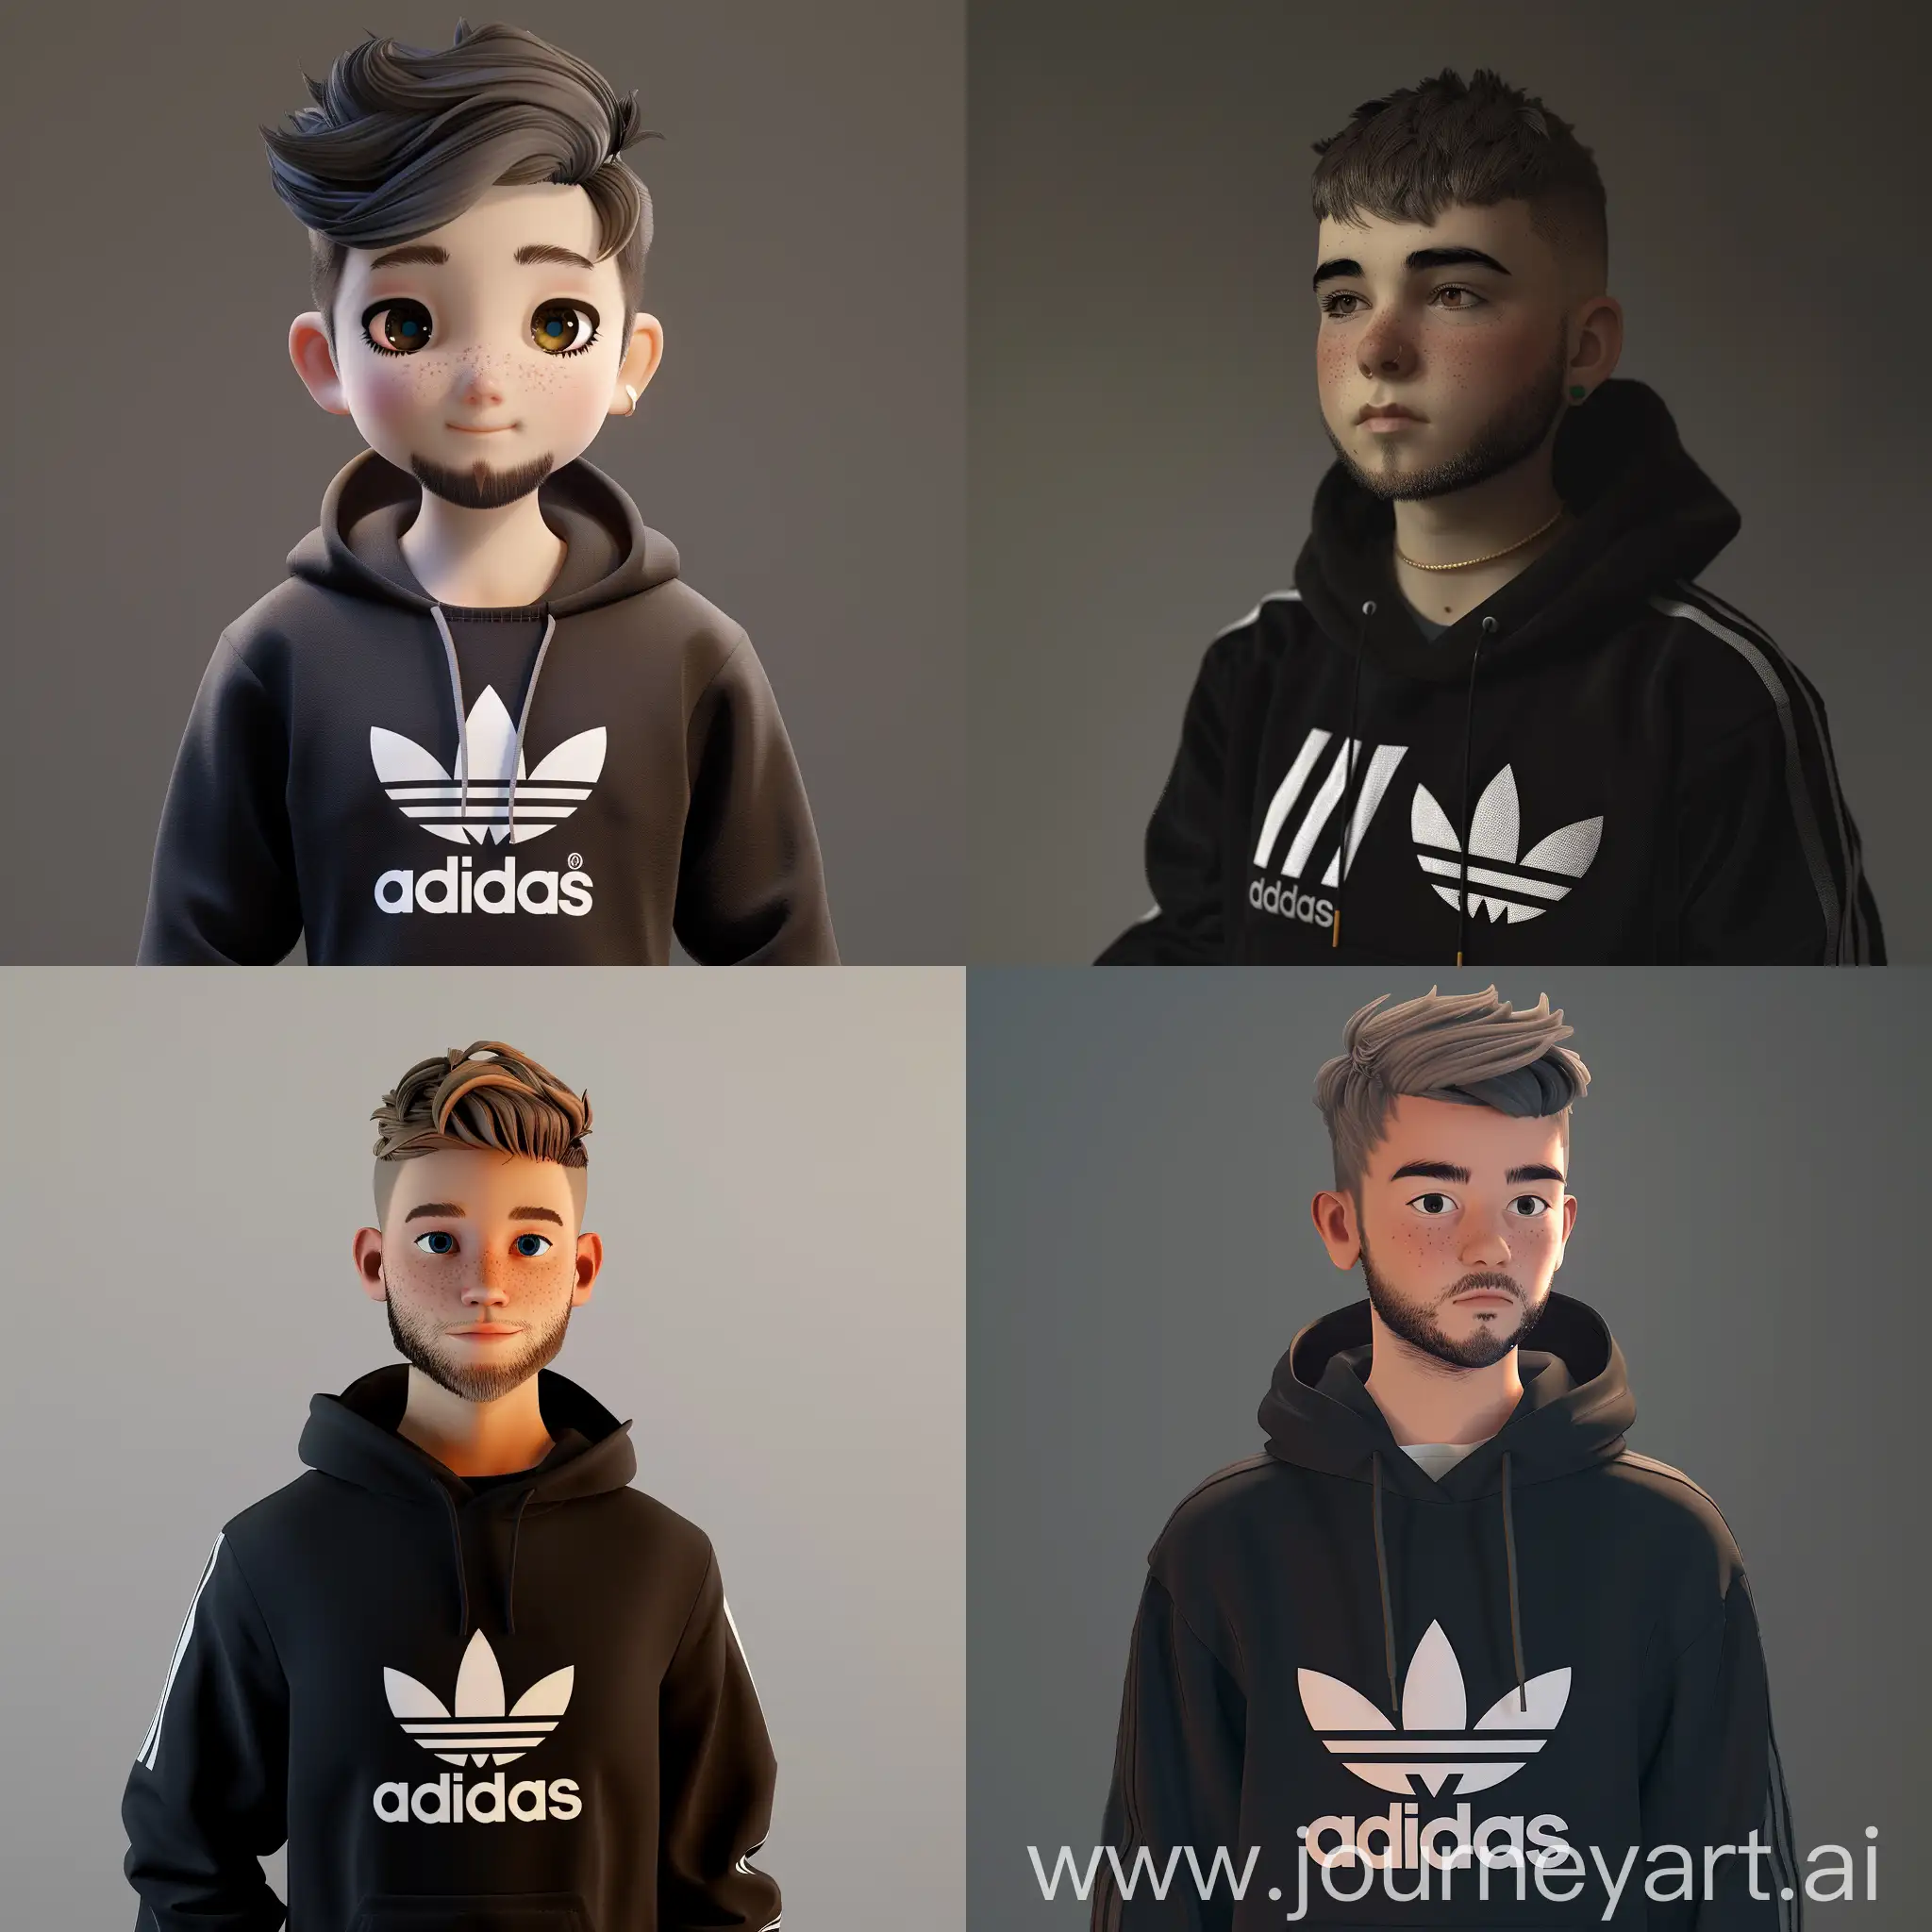 A 20-year-old boy with short hair, a short beard, Adidas logo, a black Adidas hoodie, simple photo taken with a phone, real and very simple, suitable for profile, 3D animation style